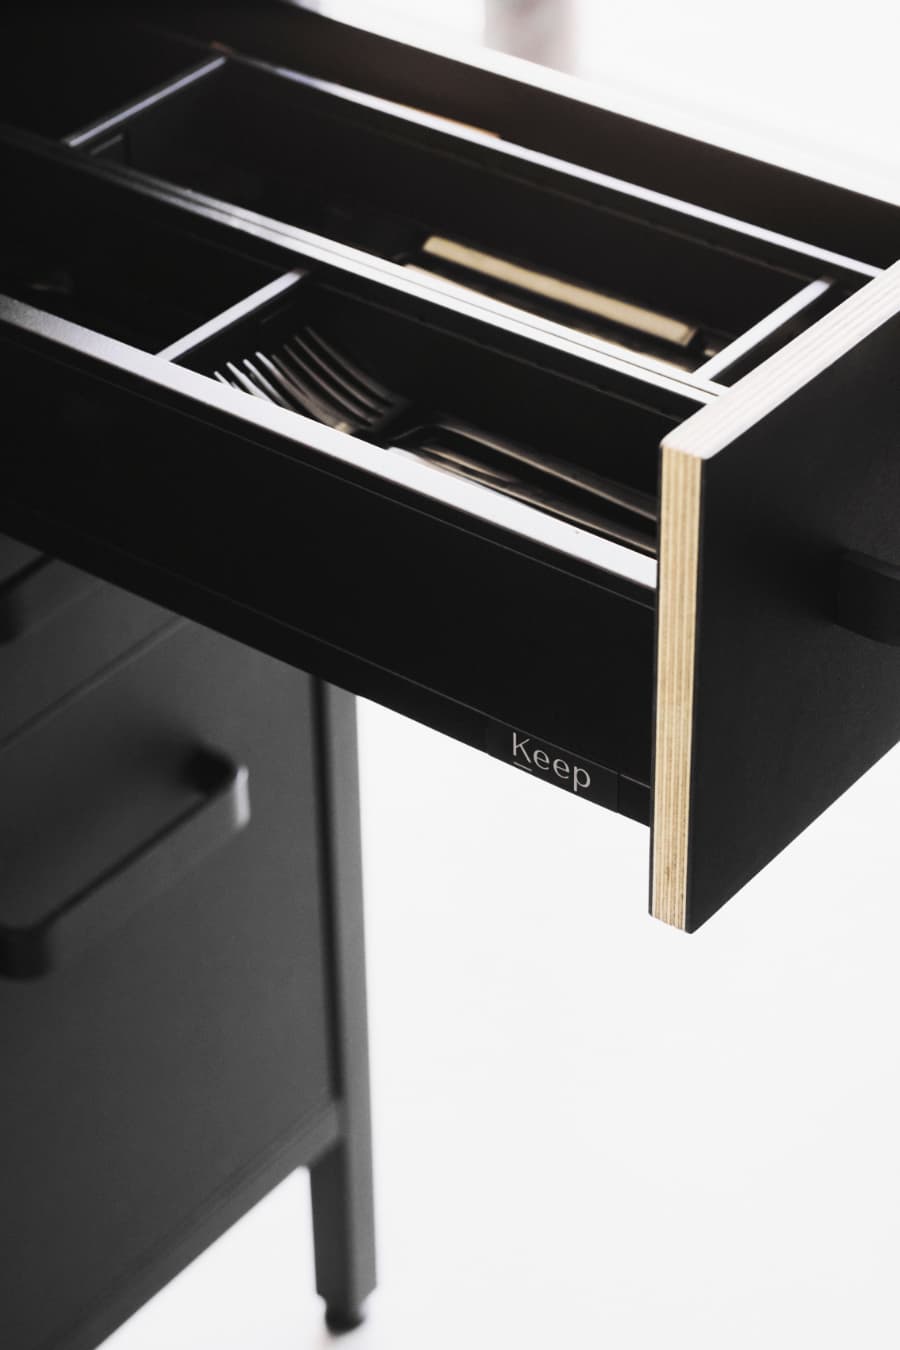 black-kitchen-from-keep-cutlery-drawer-in-detail